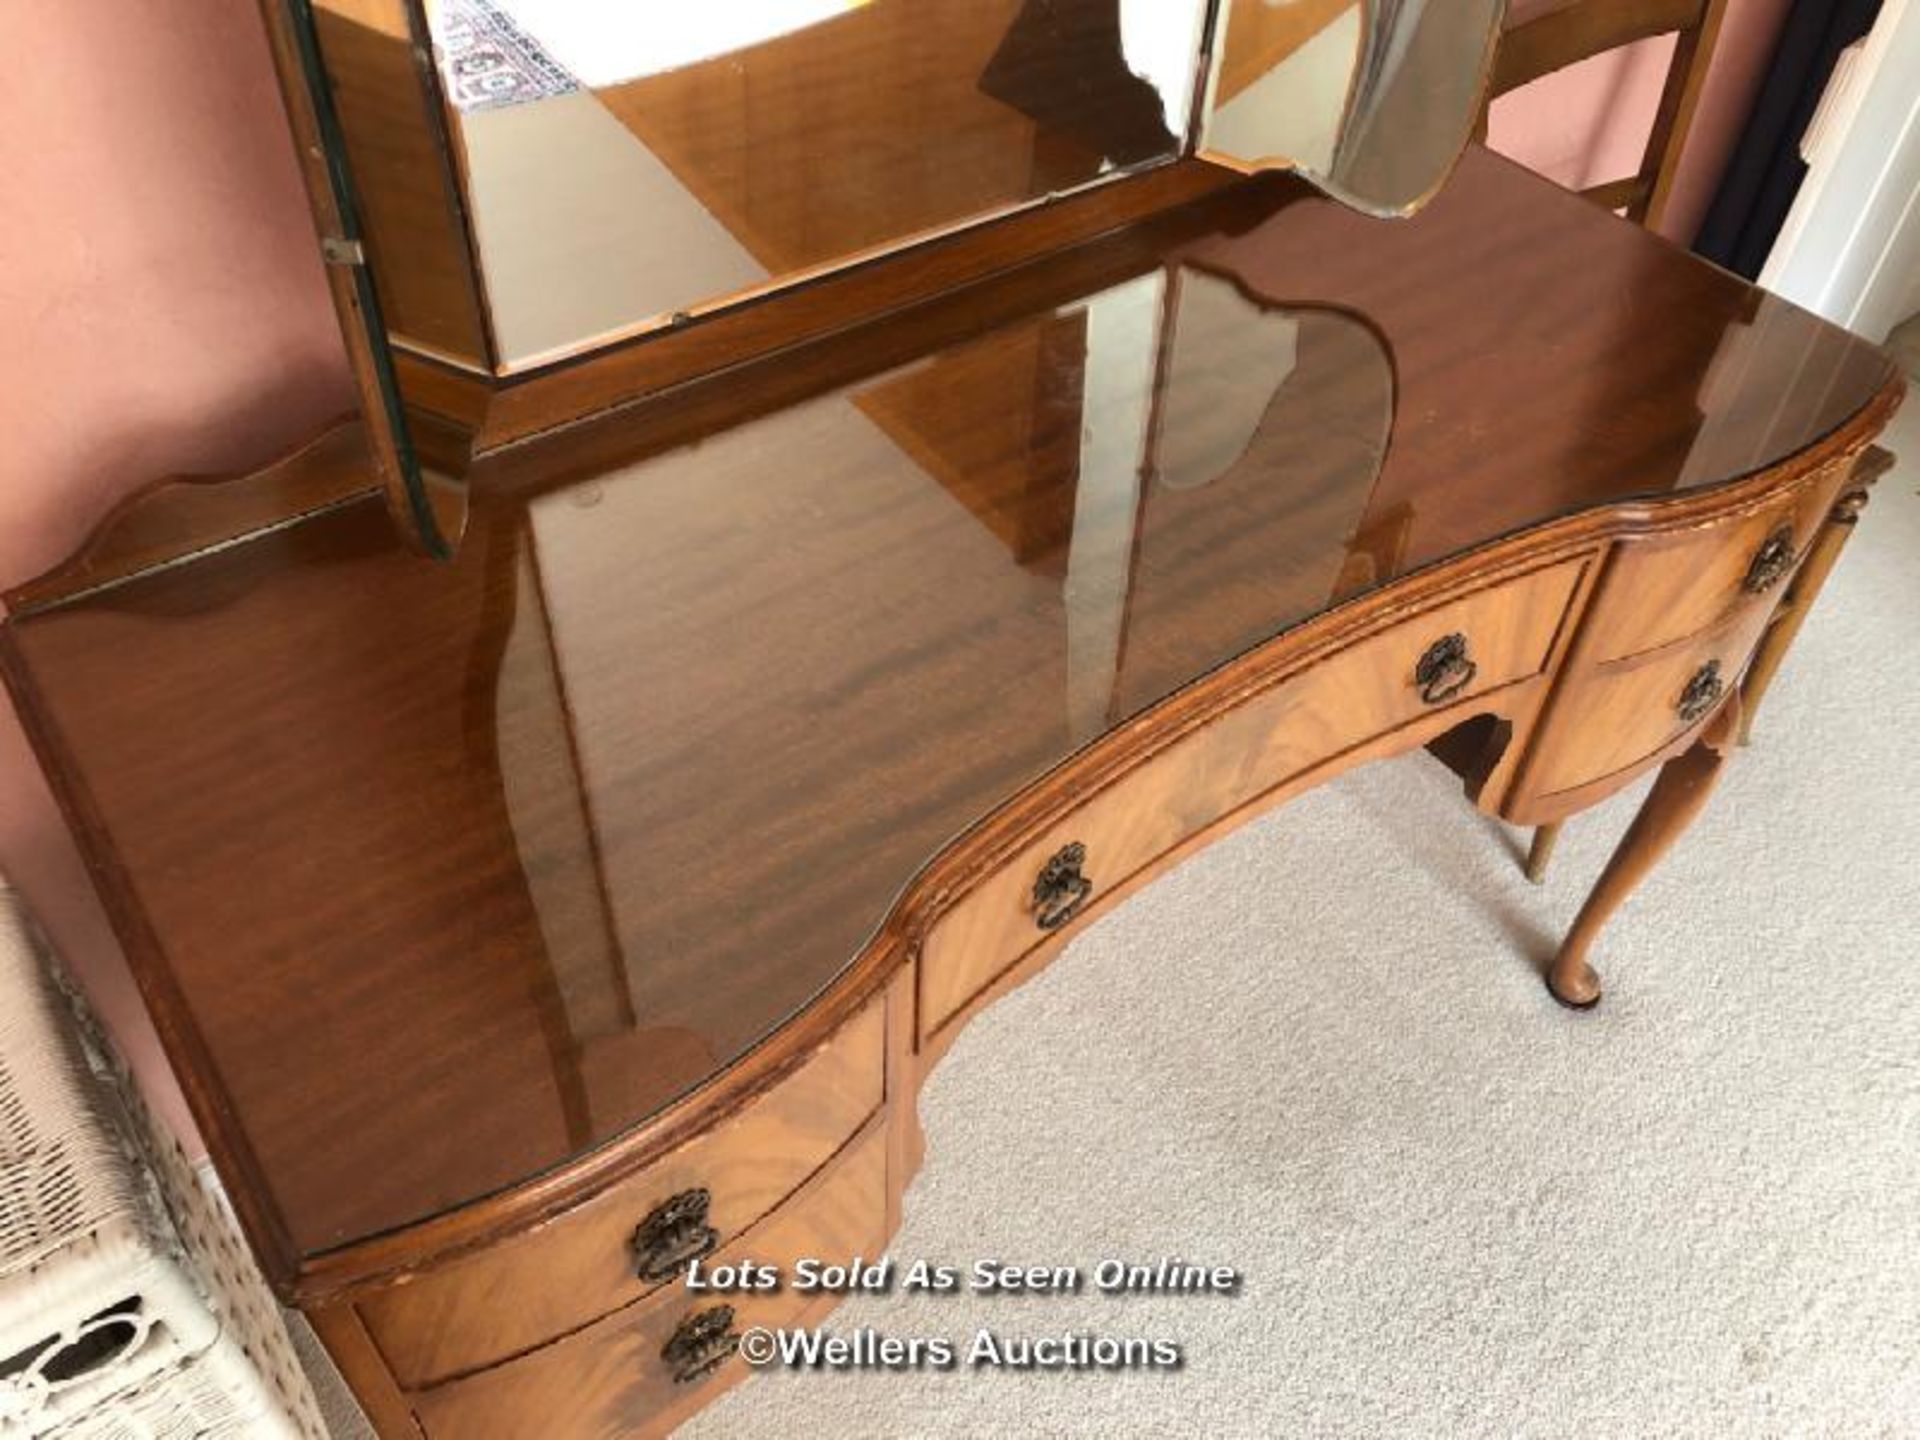 ANTIQUE FIVE DRAWER DRESSING TABLE WITH GLASS TOP AND FOLDING MIRROR, 117 X 78 X 50CM, MADE BY THE - Image 3 of 4